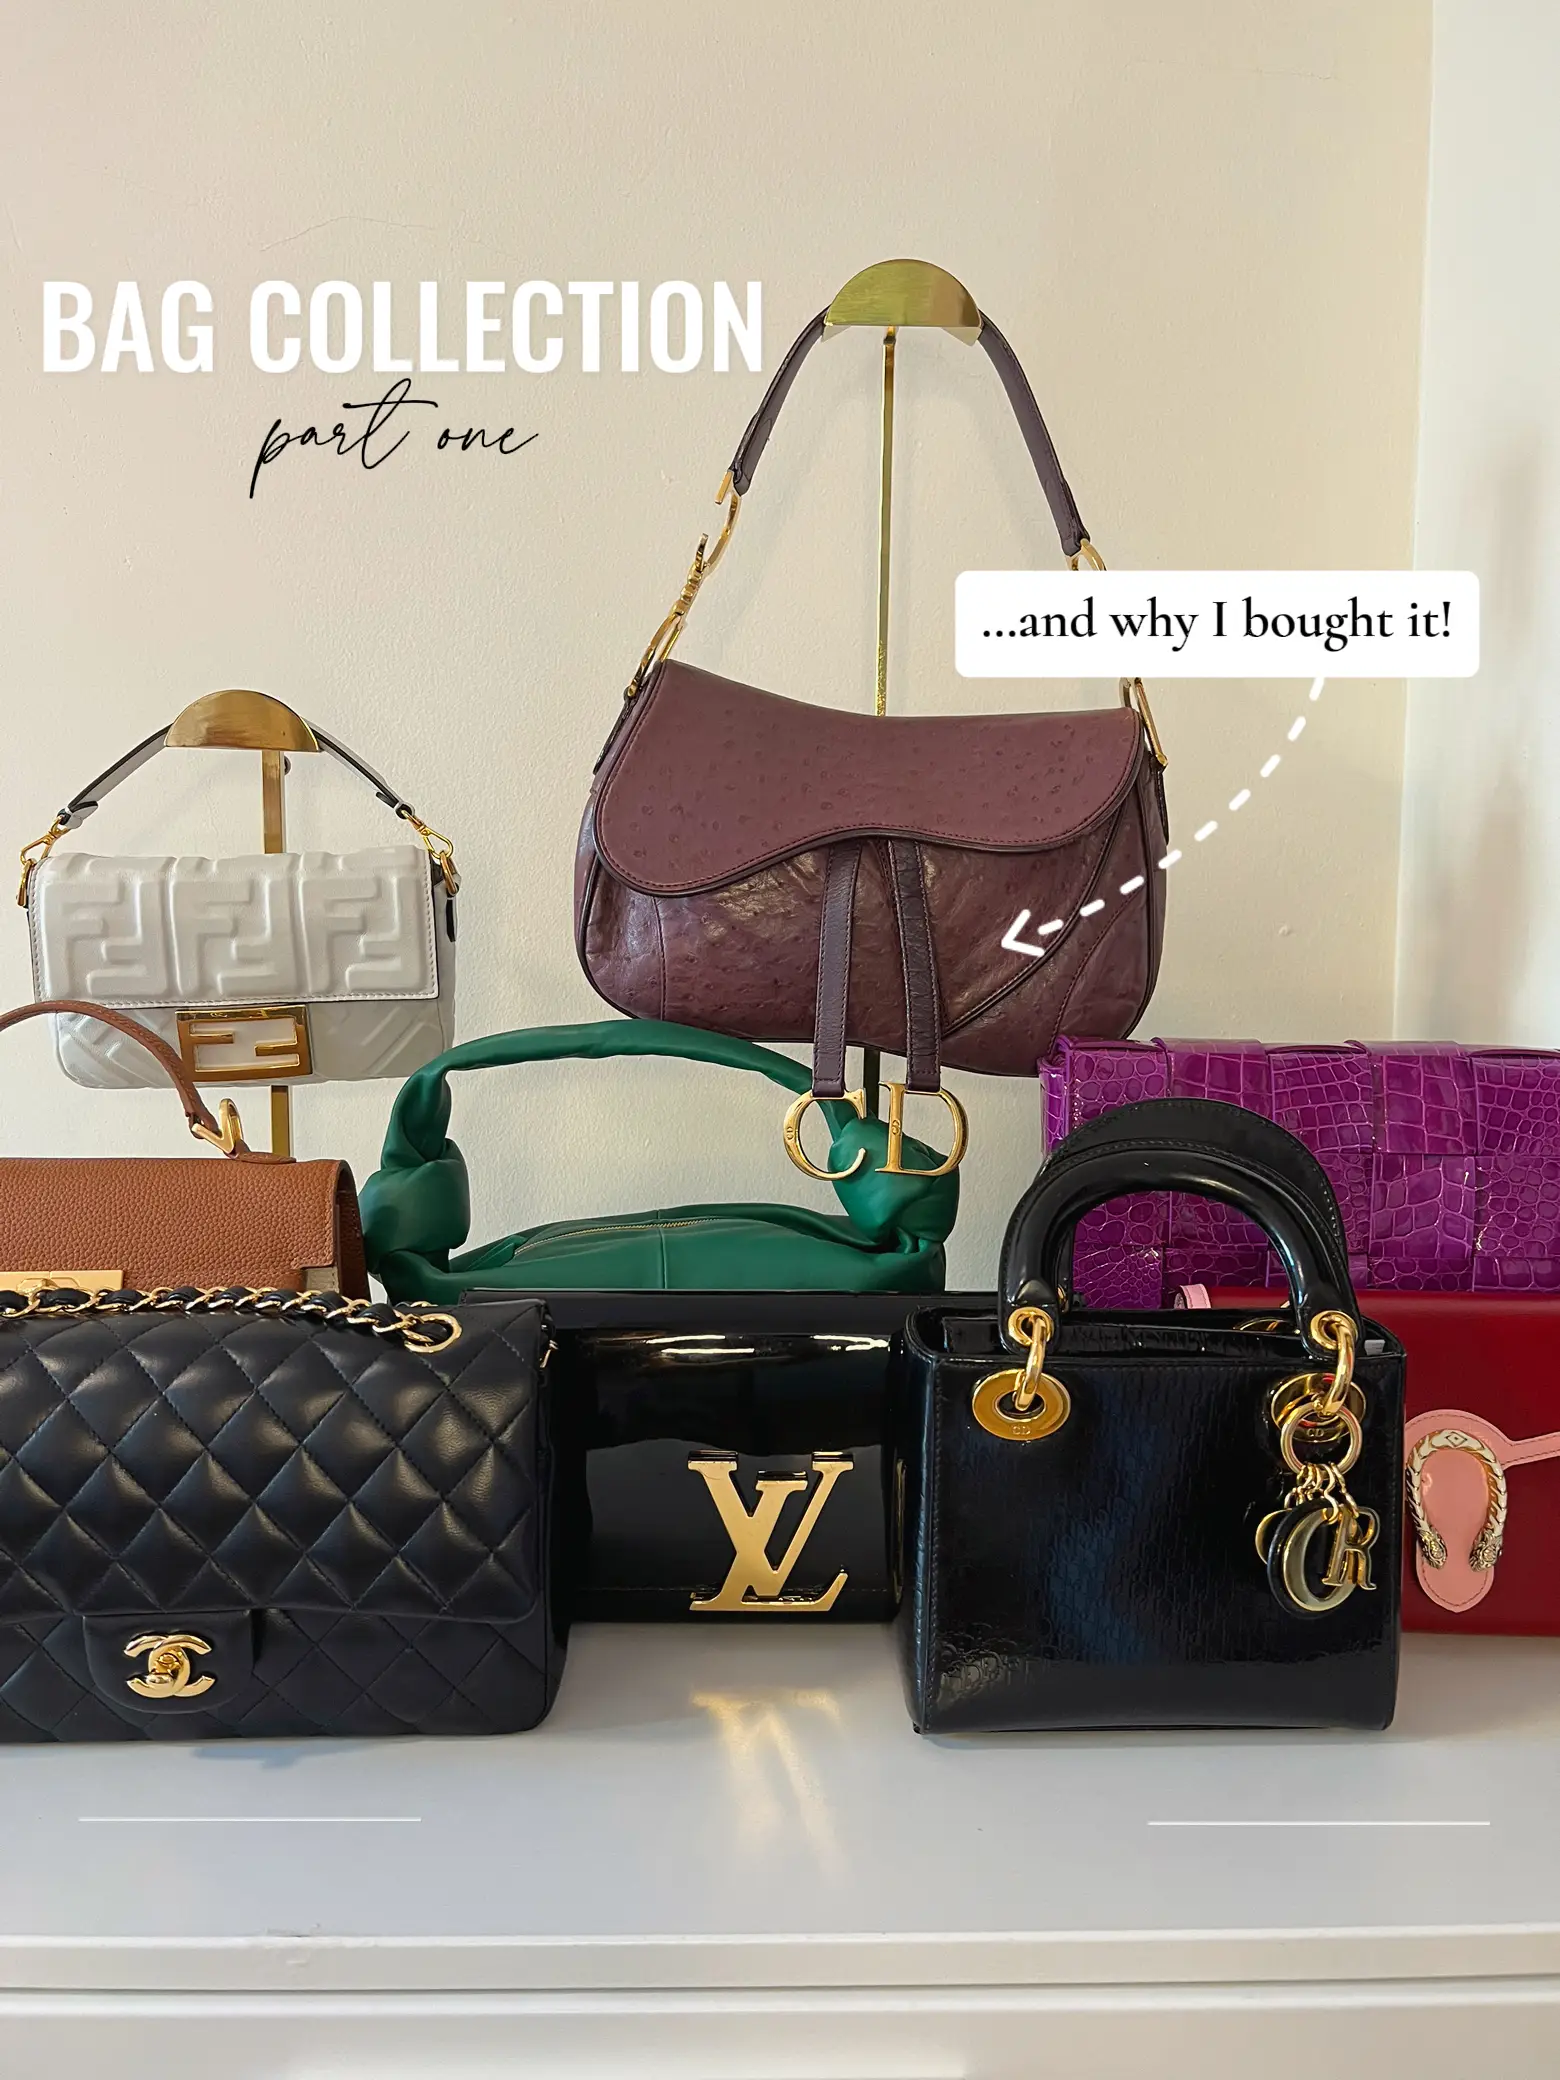 My handbag collection (+ why I bought it) part 1, Gallery posted by Lucy  Jones